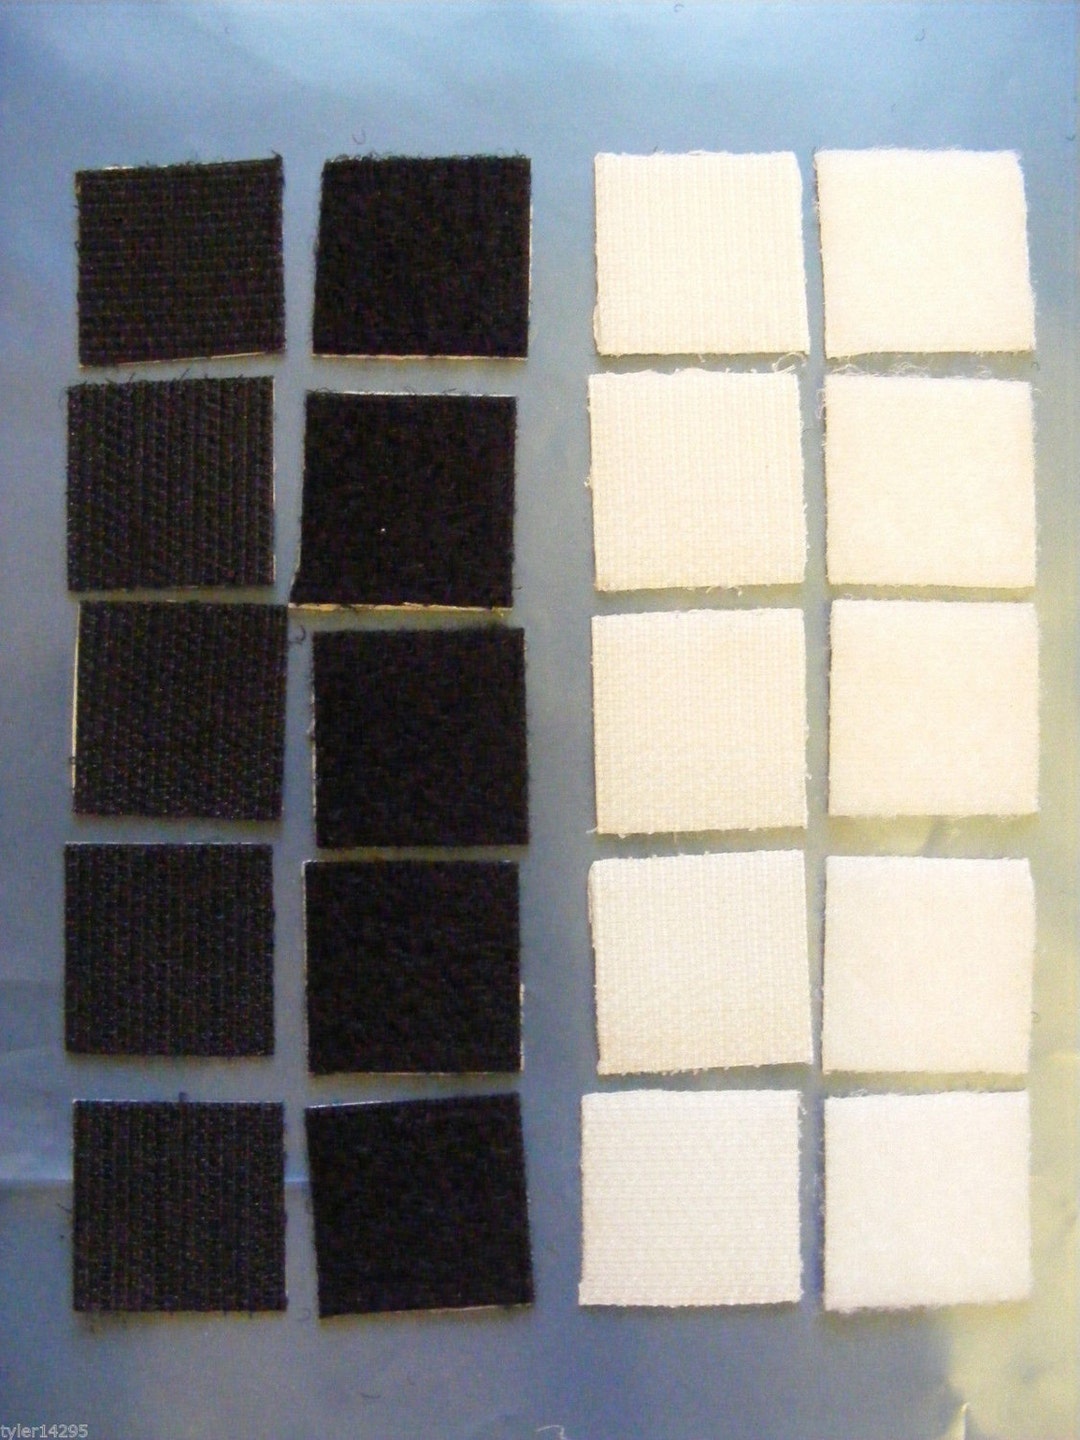 x10) Lot of Velcro Hook and Loop Squares 1 x 1 Black